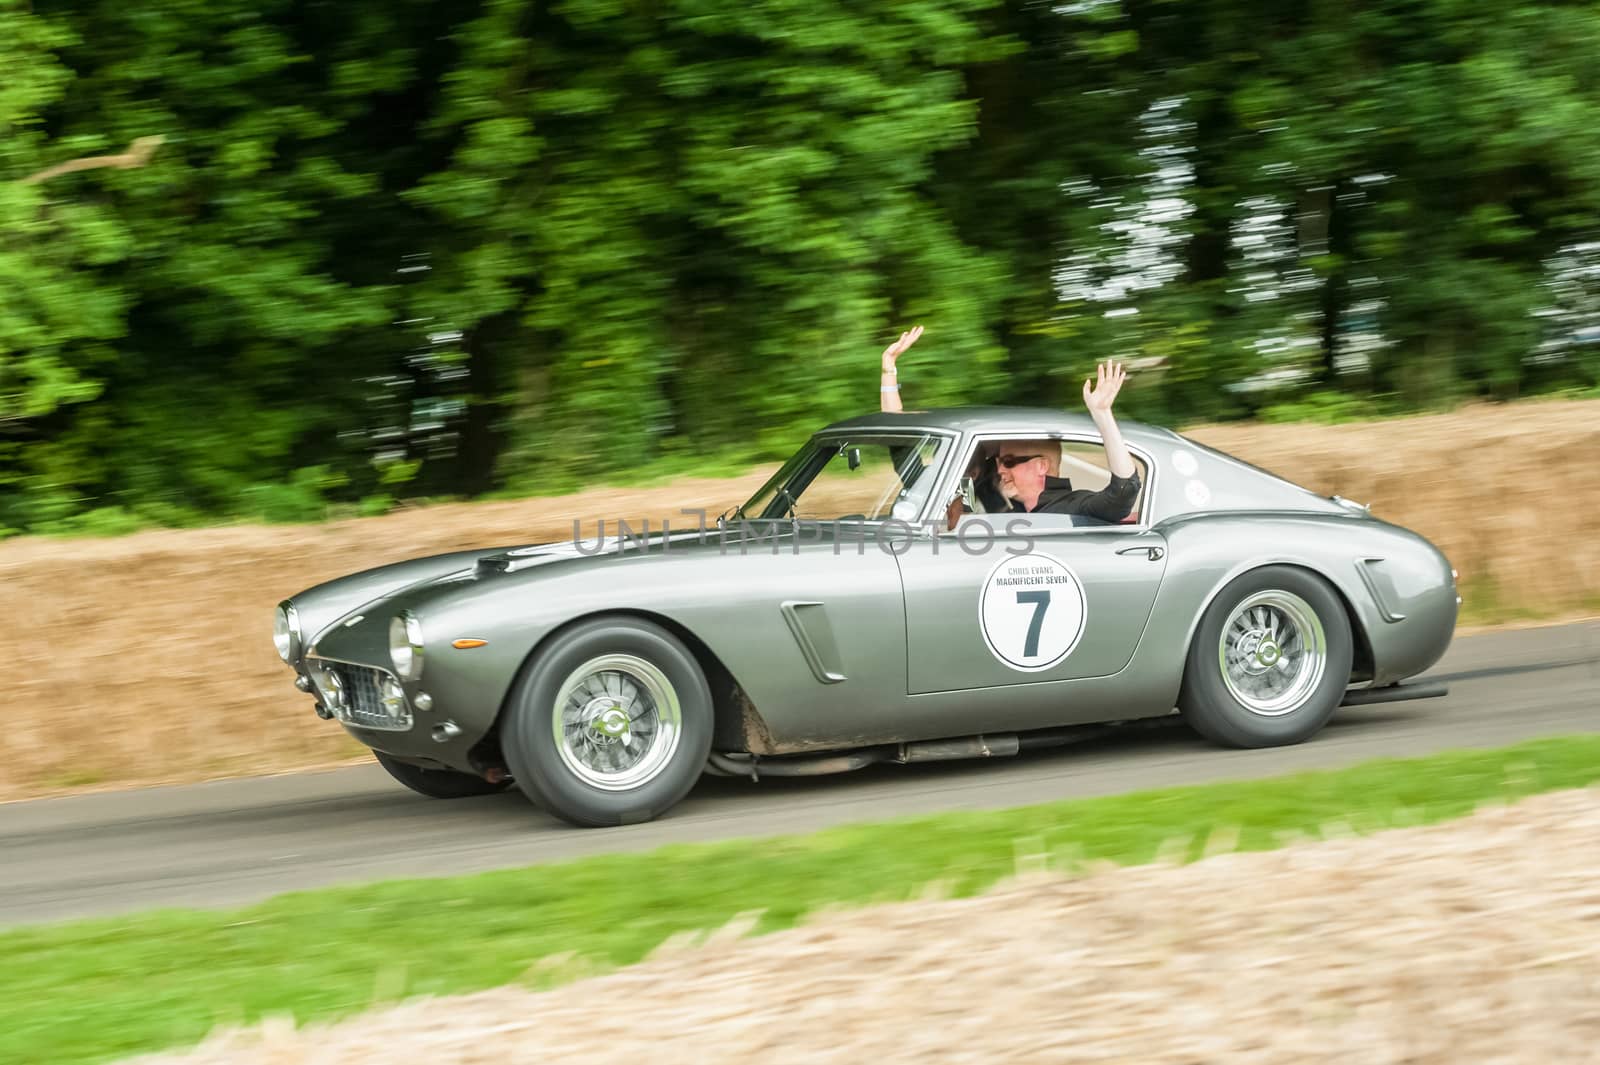 Goodwood, UK - July 1, 2012: British TV and radio personality Chris Evans driving a classic Ferrari 250 SWB the hill course at Goodwood, UK